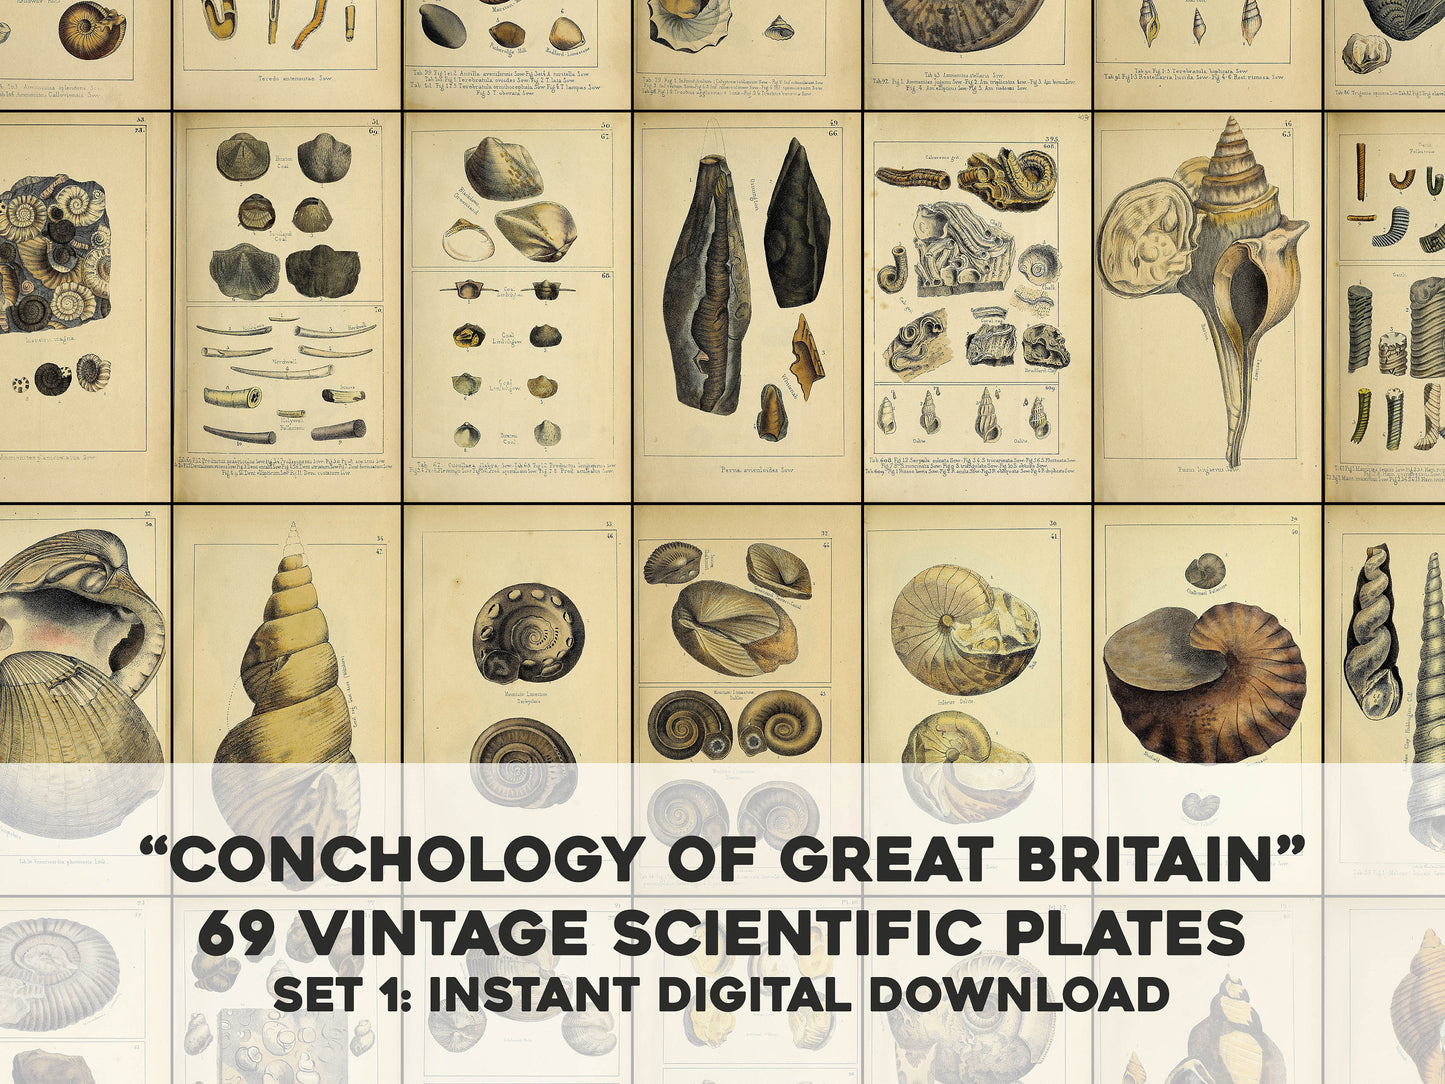 Mineralogical Conchology of Great Britain Set 1 [69 Images]